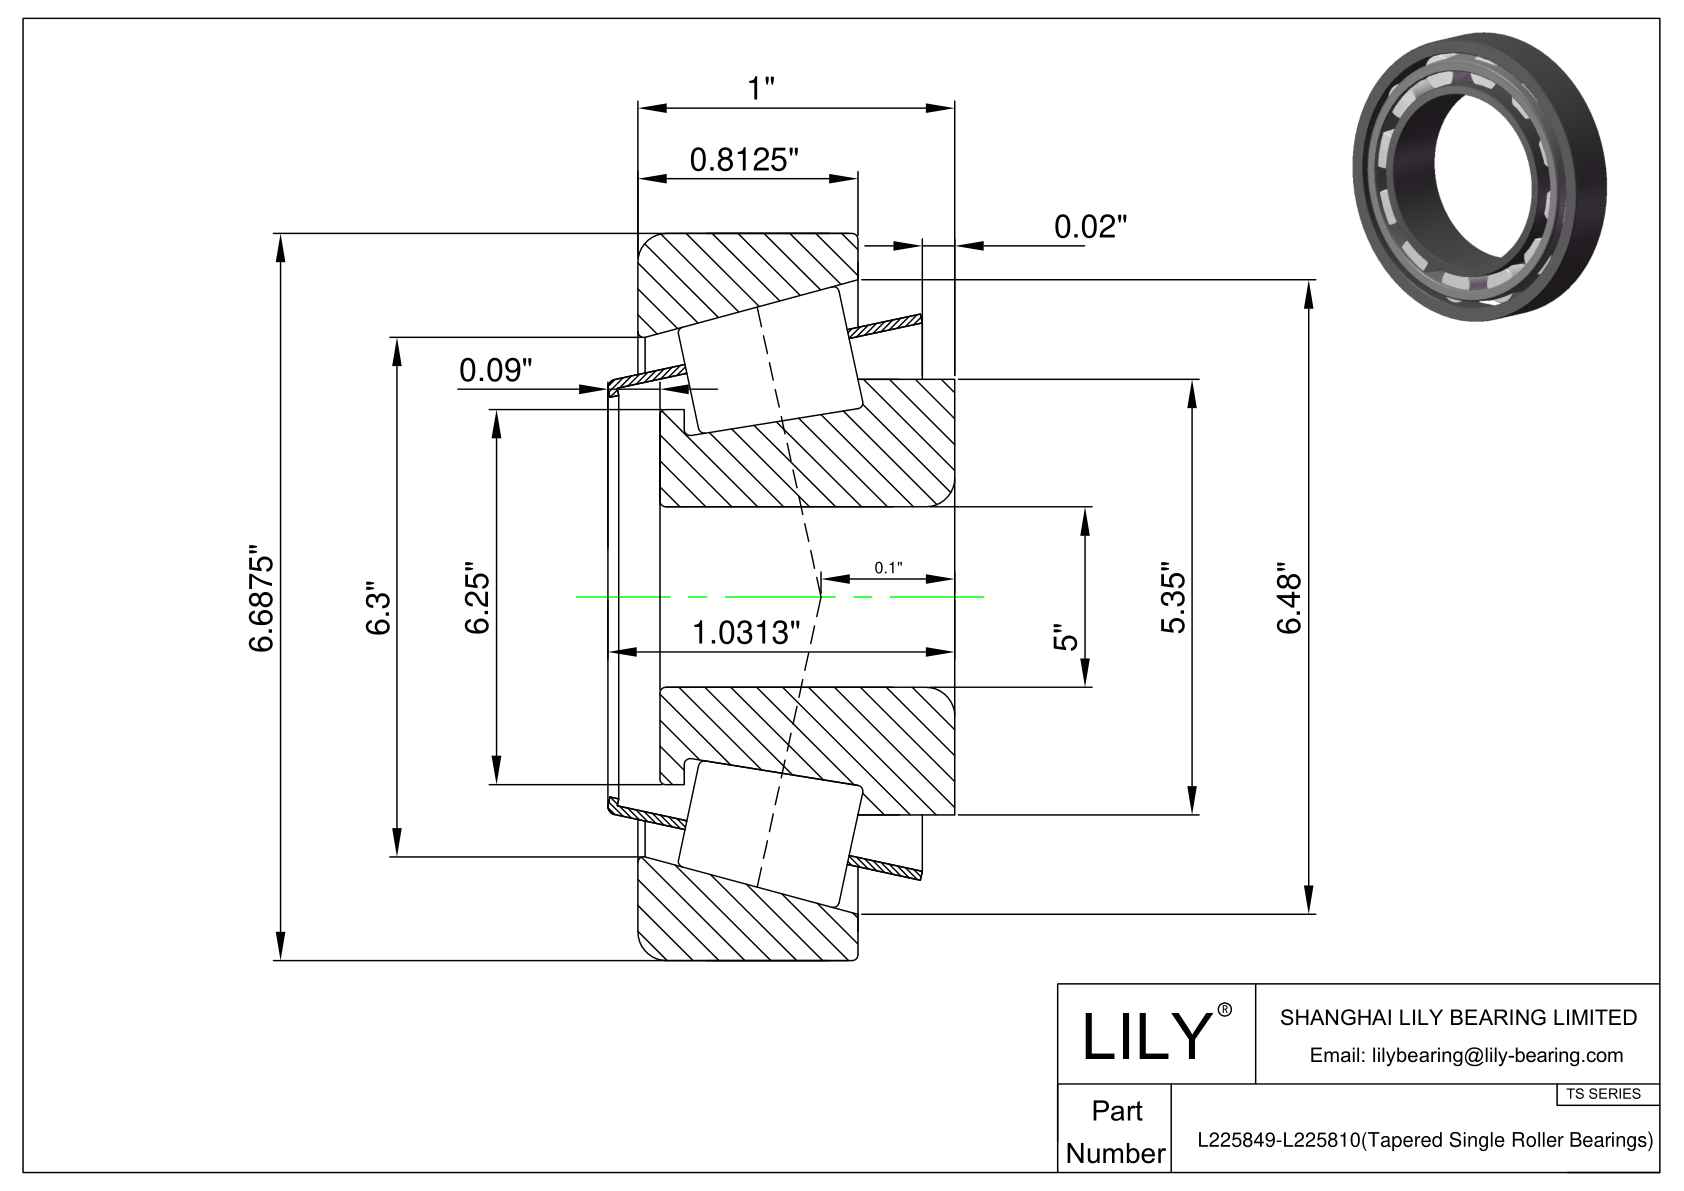 L225849-L225810 TS (Tapered Single Roller Bearings) (Imperial) cad drawing